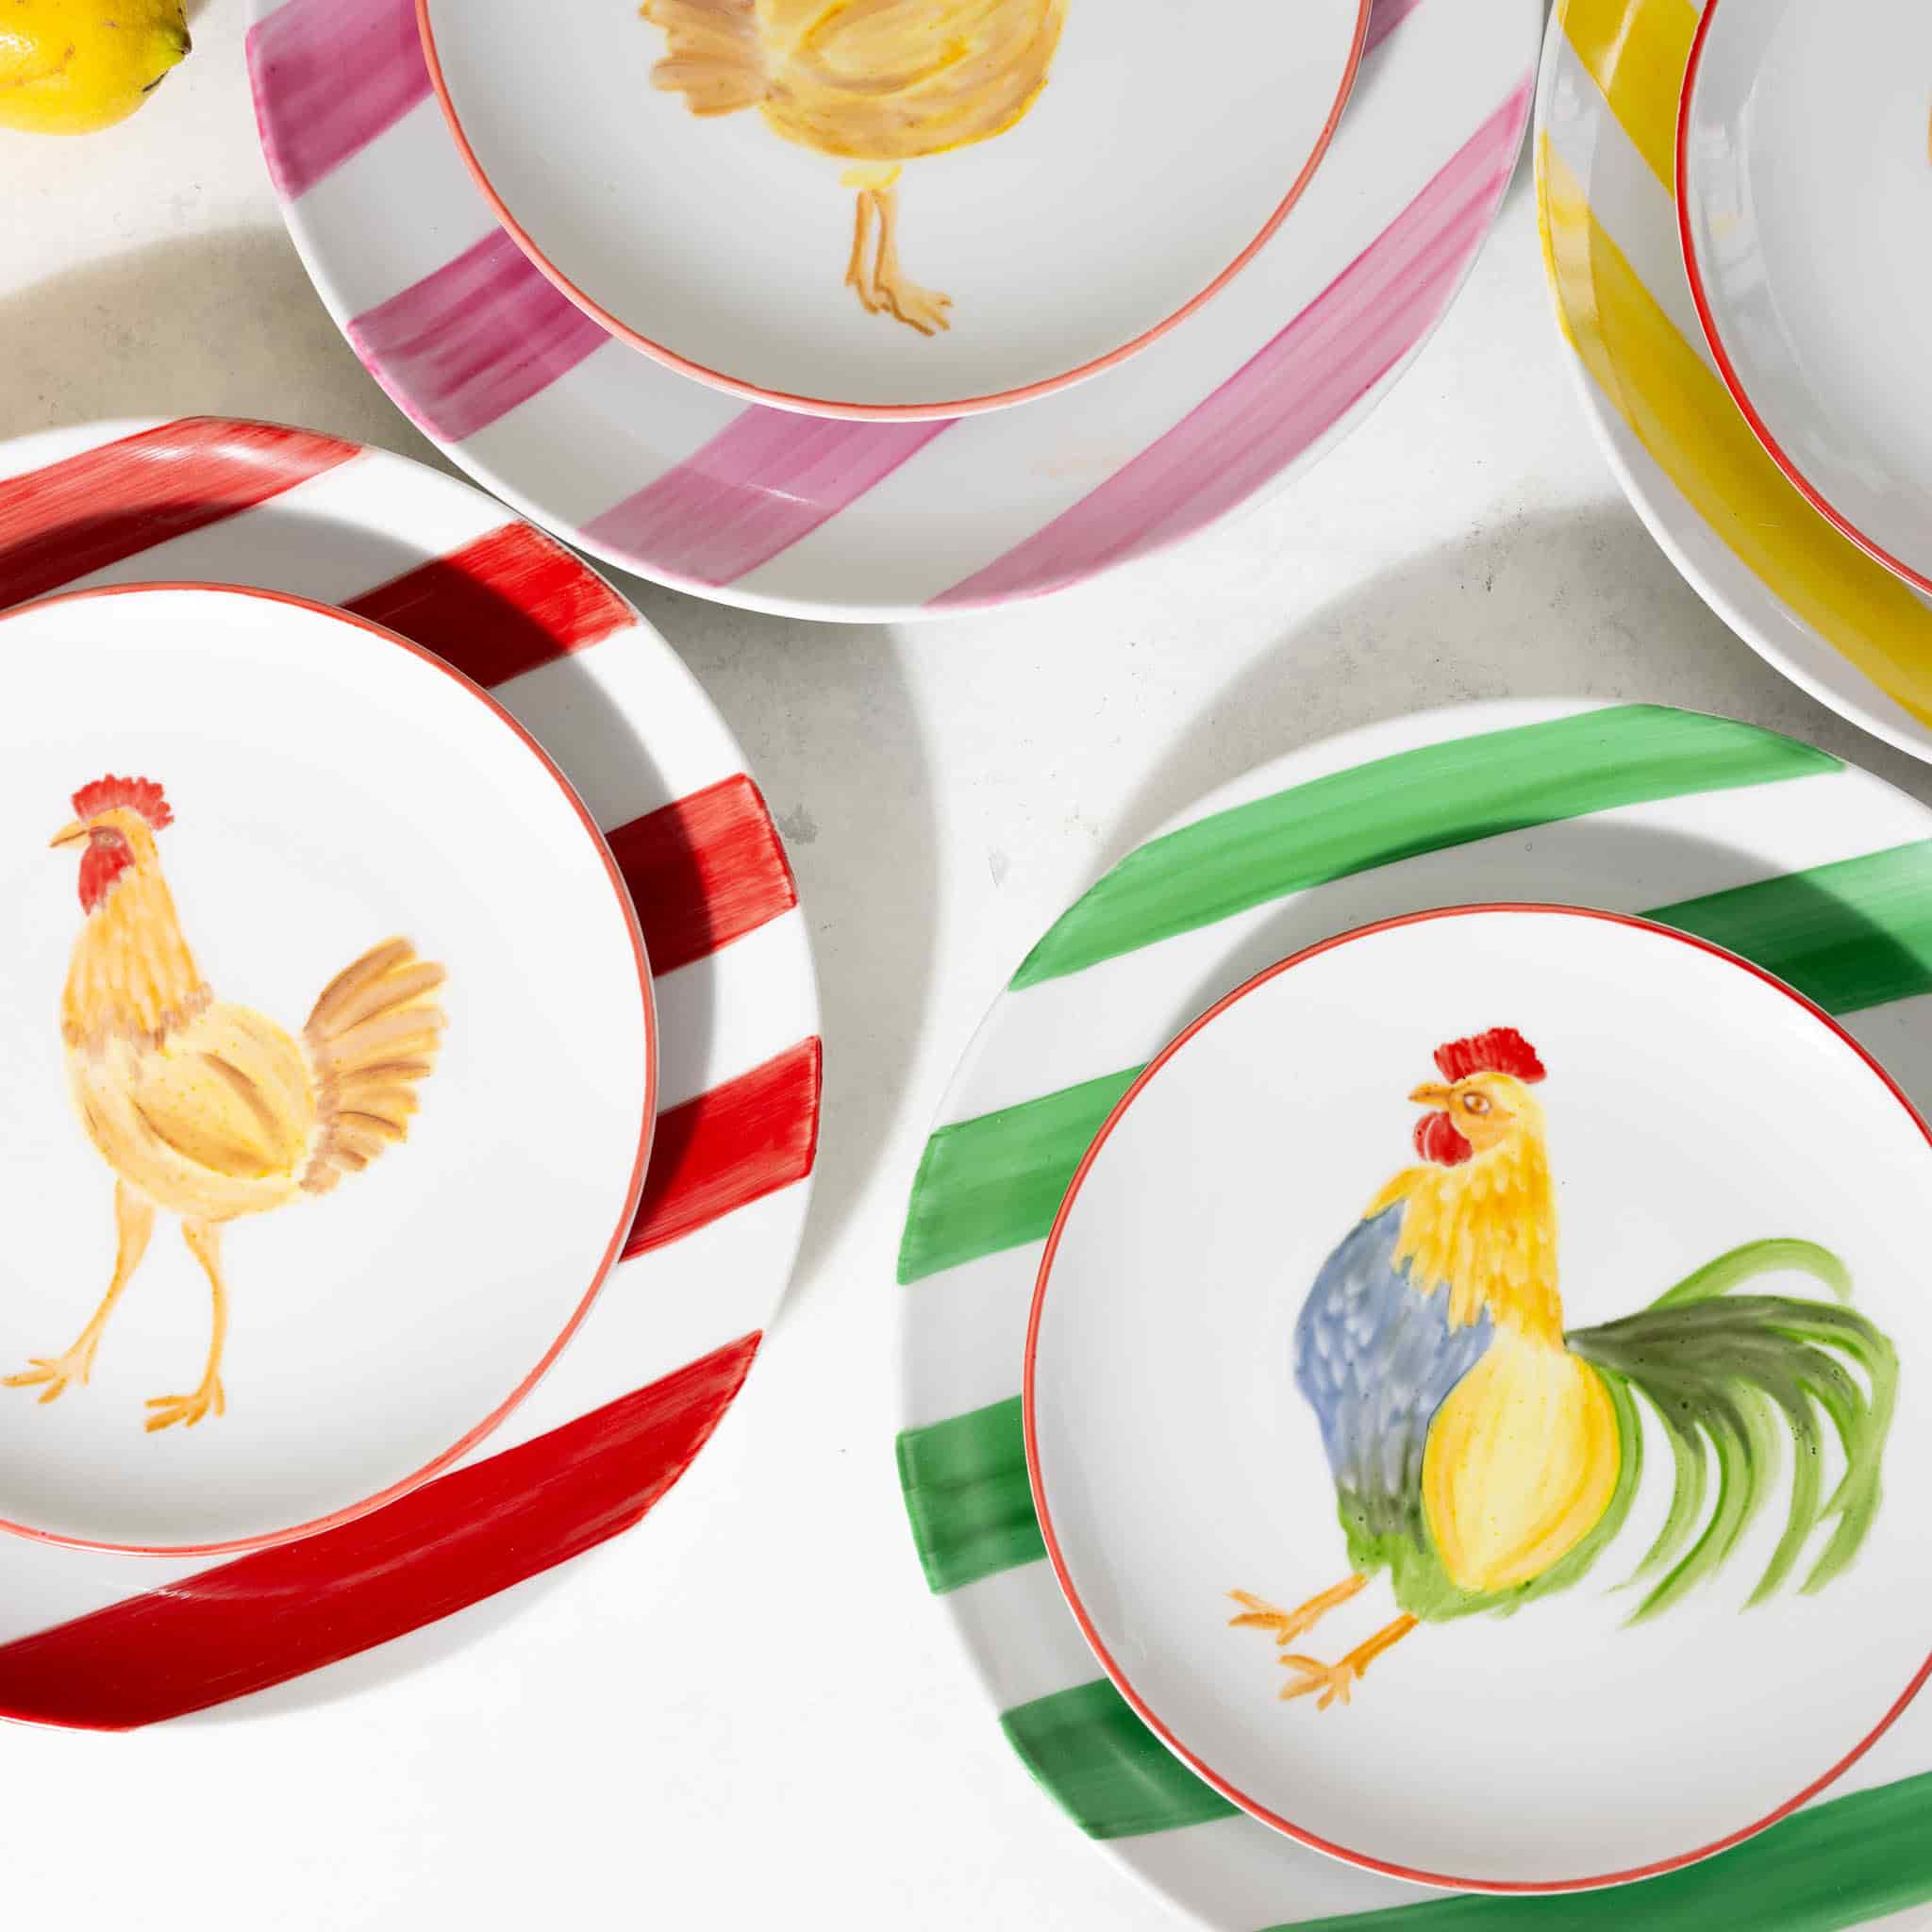 The Platera Lola Chicken Porcelain Side Plate, 21cm